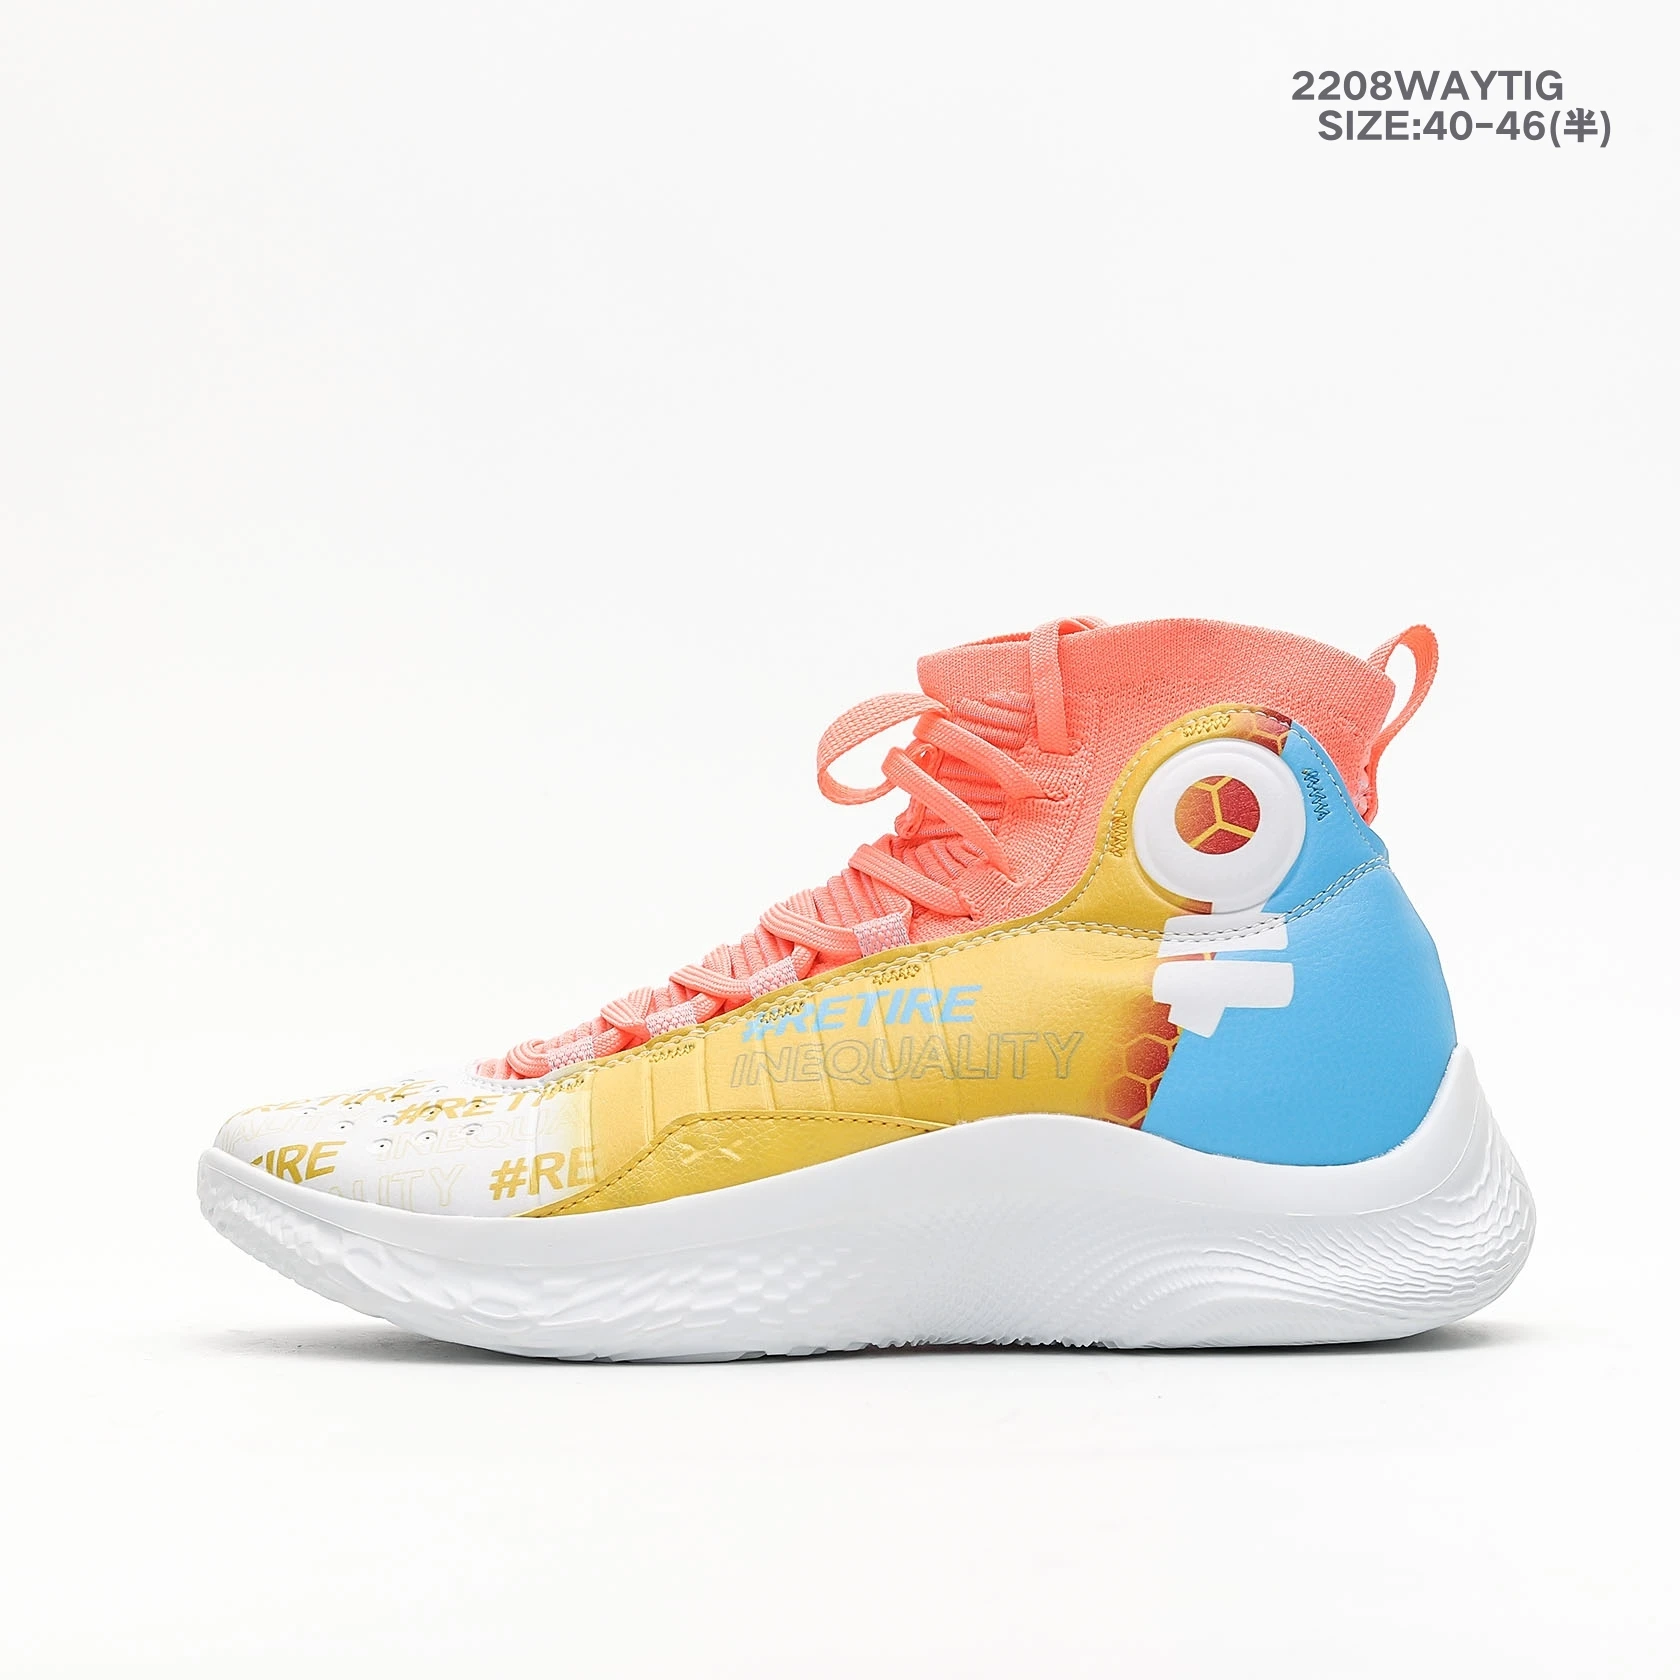 

Under Armour Curry 4 FLOTRO UA Andrma Perforation Curry Signature Collection FLOW Men's Cultural Basketball Shoes Lightweight